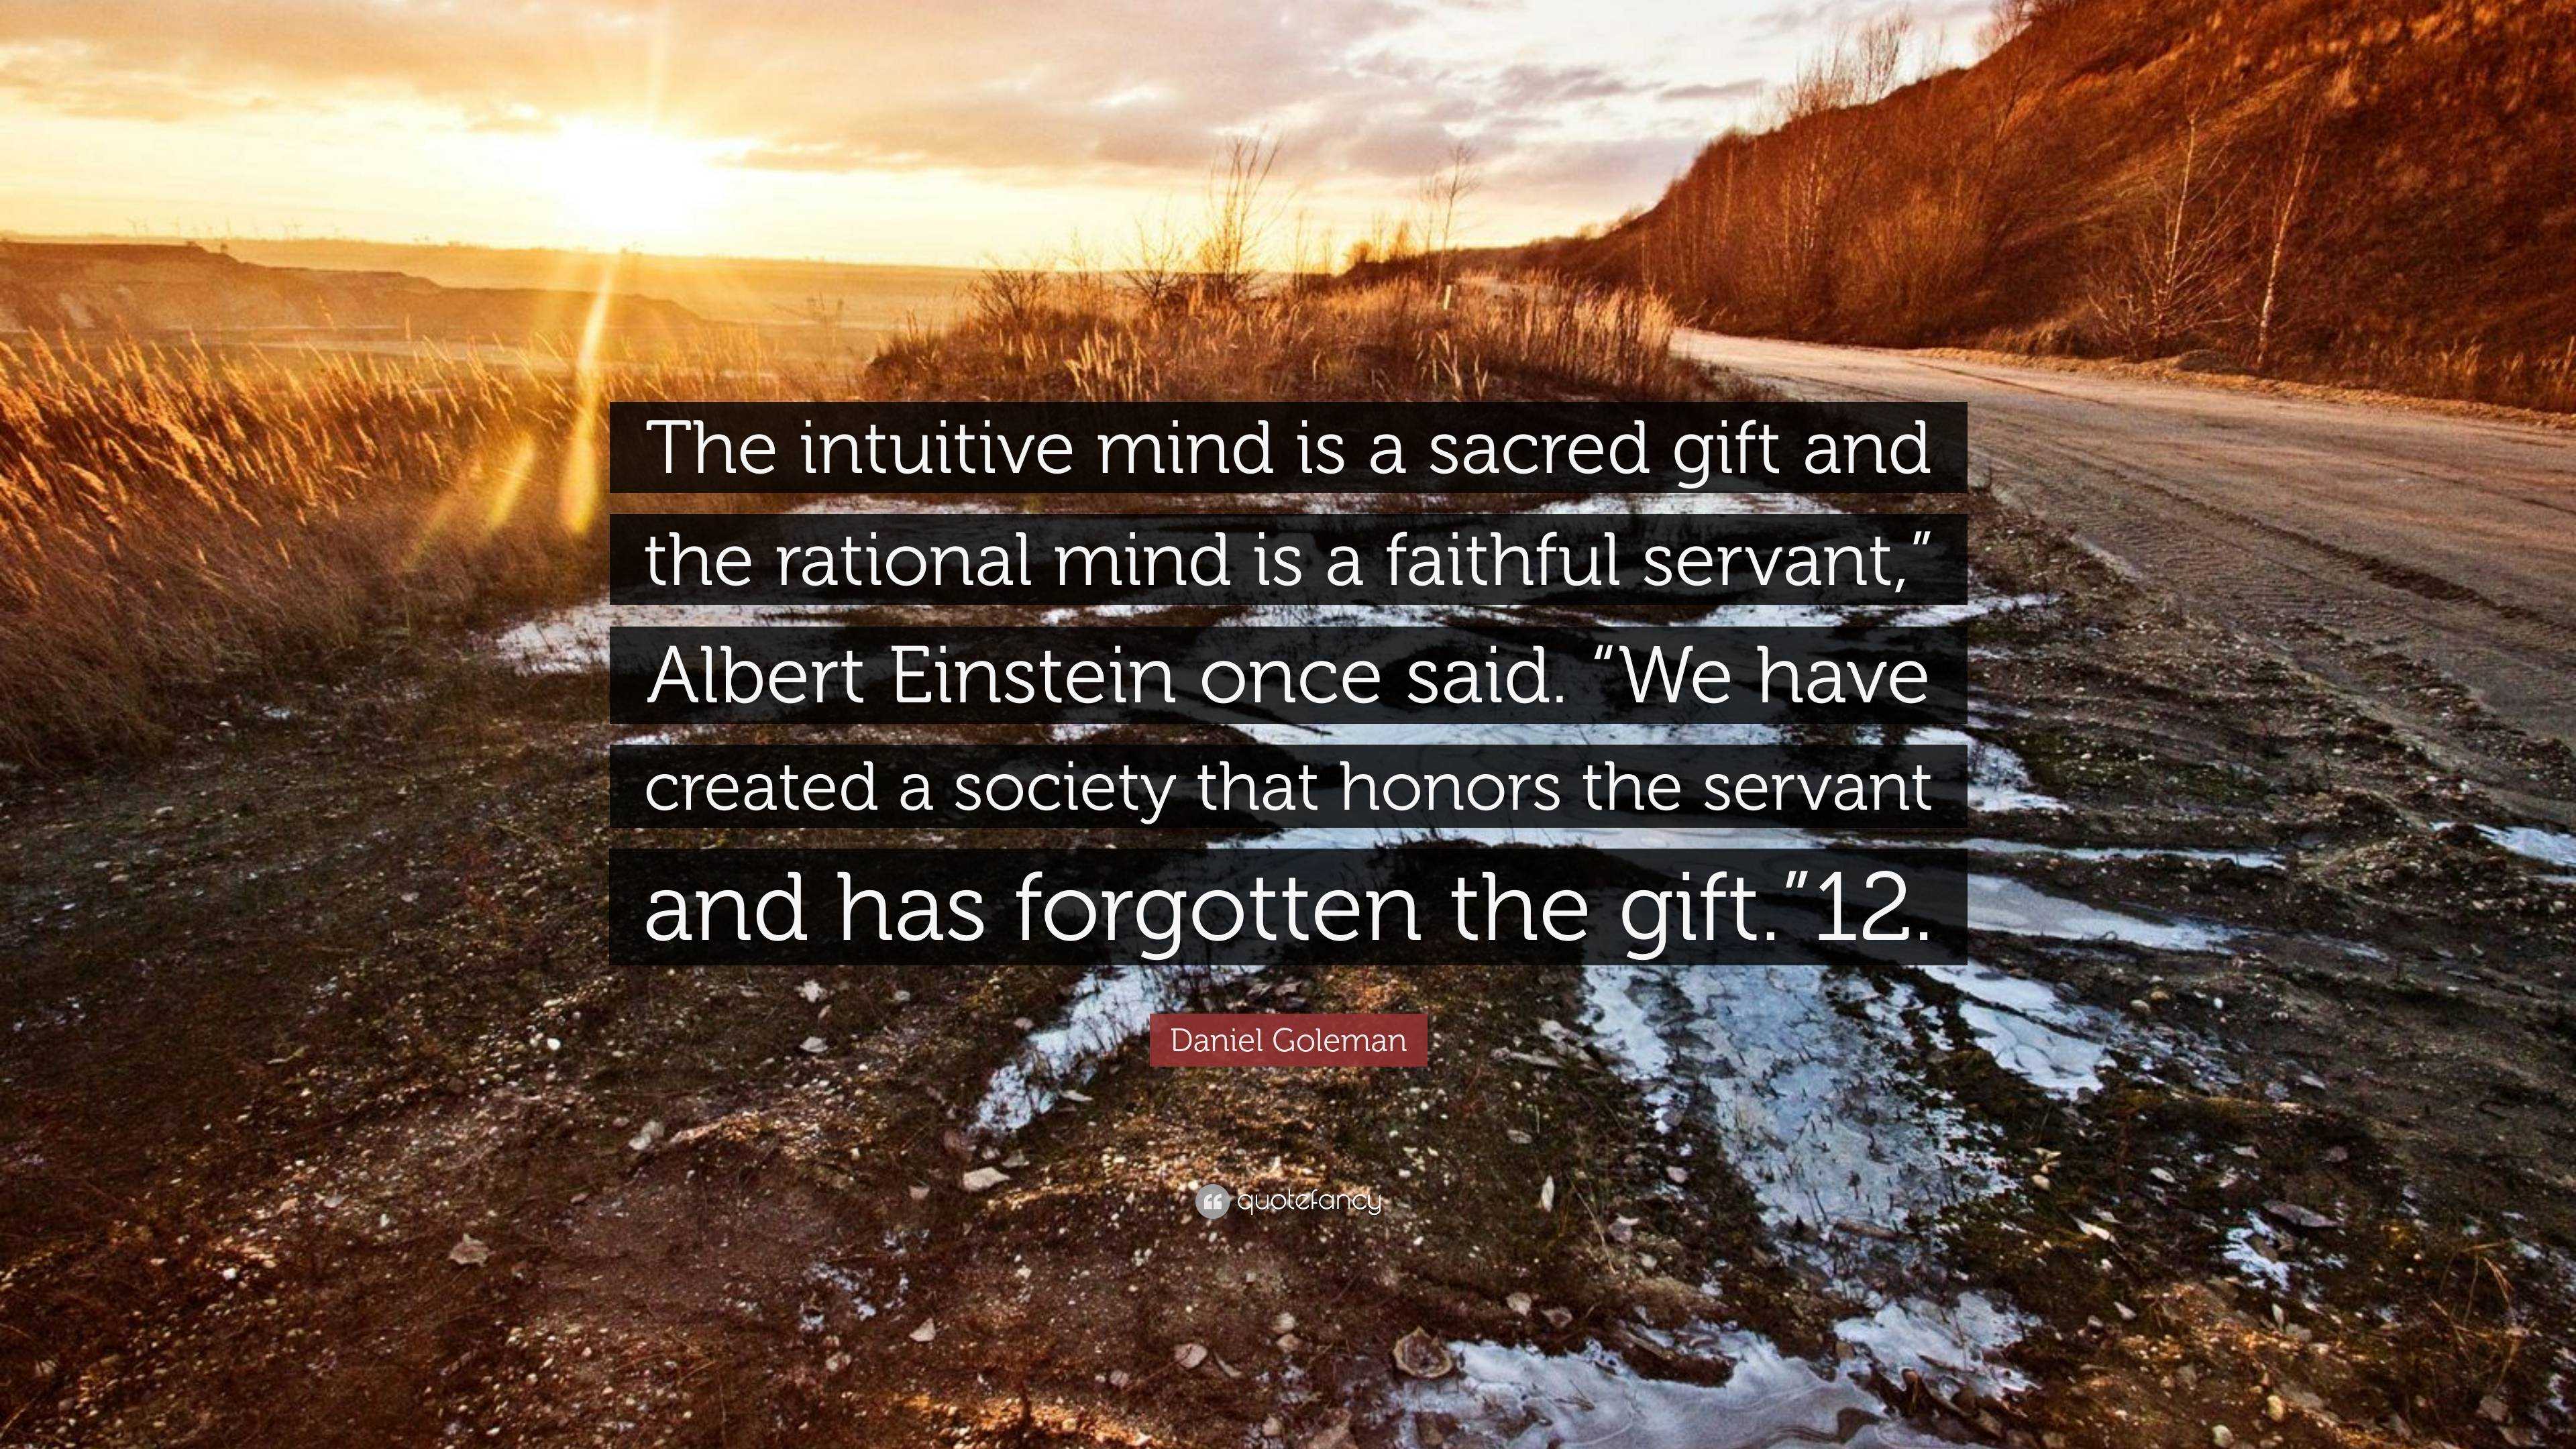 Daniel Goleman Quote “The intuitive mind is a sacred gift and the